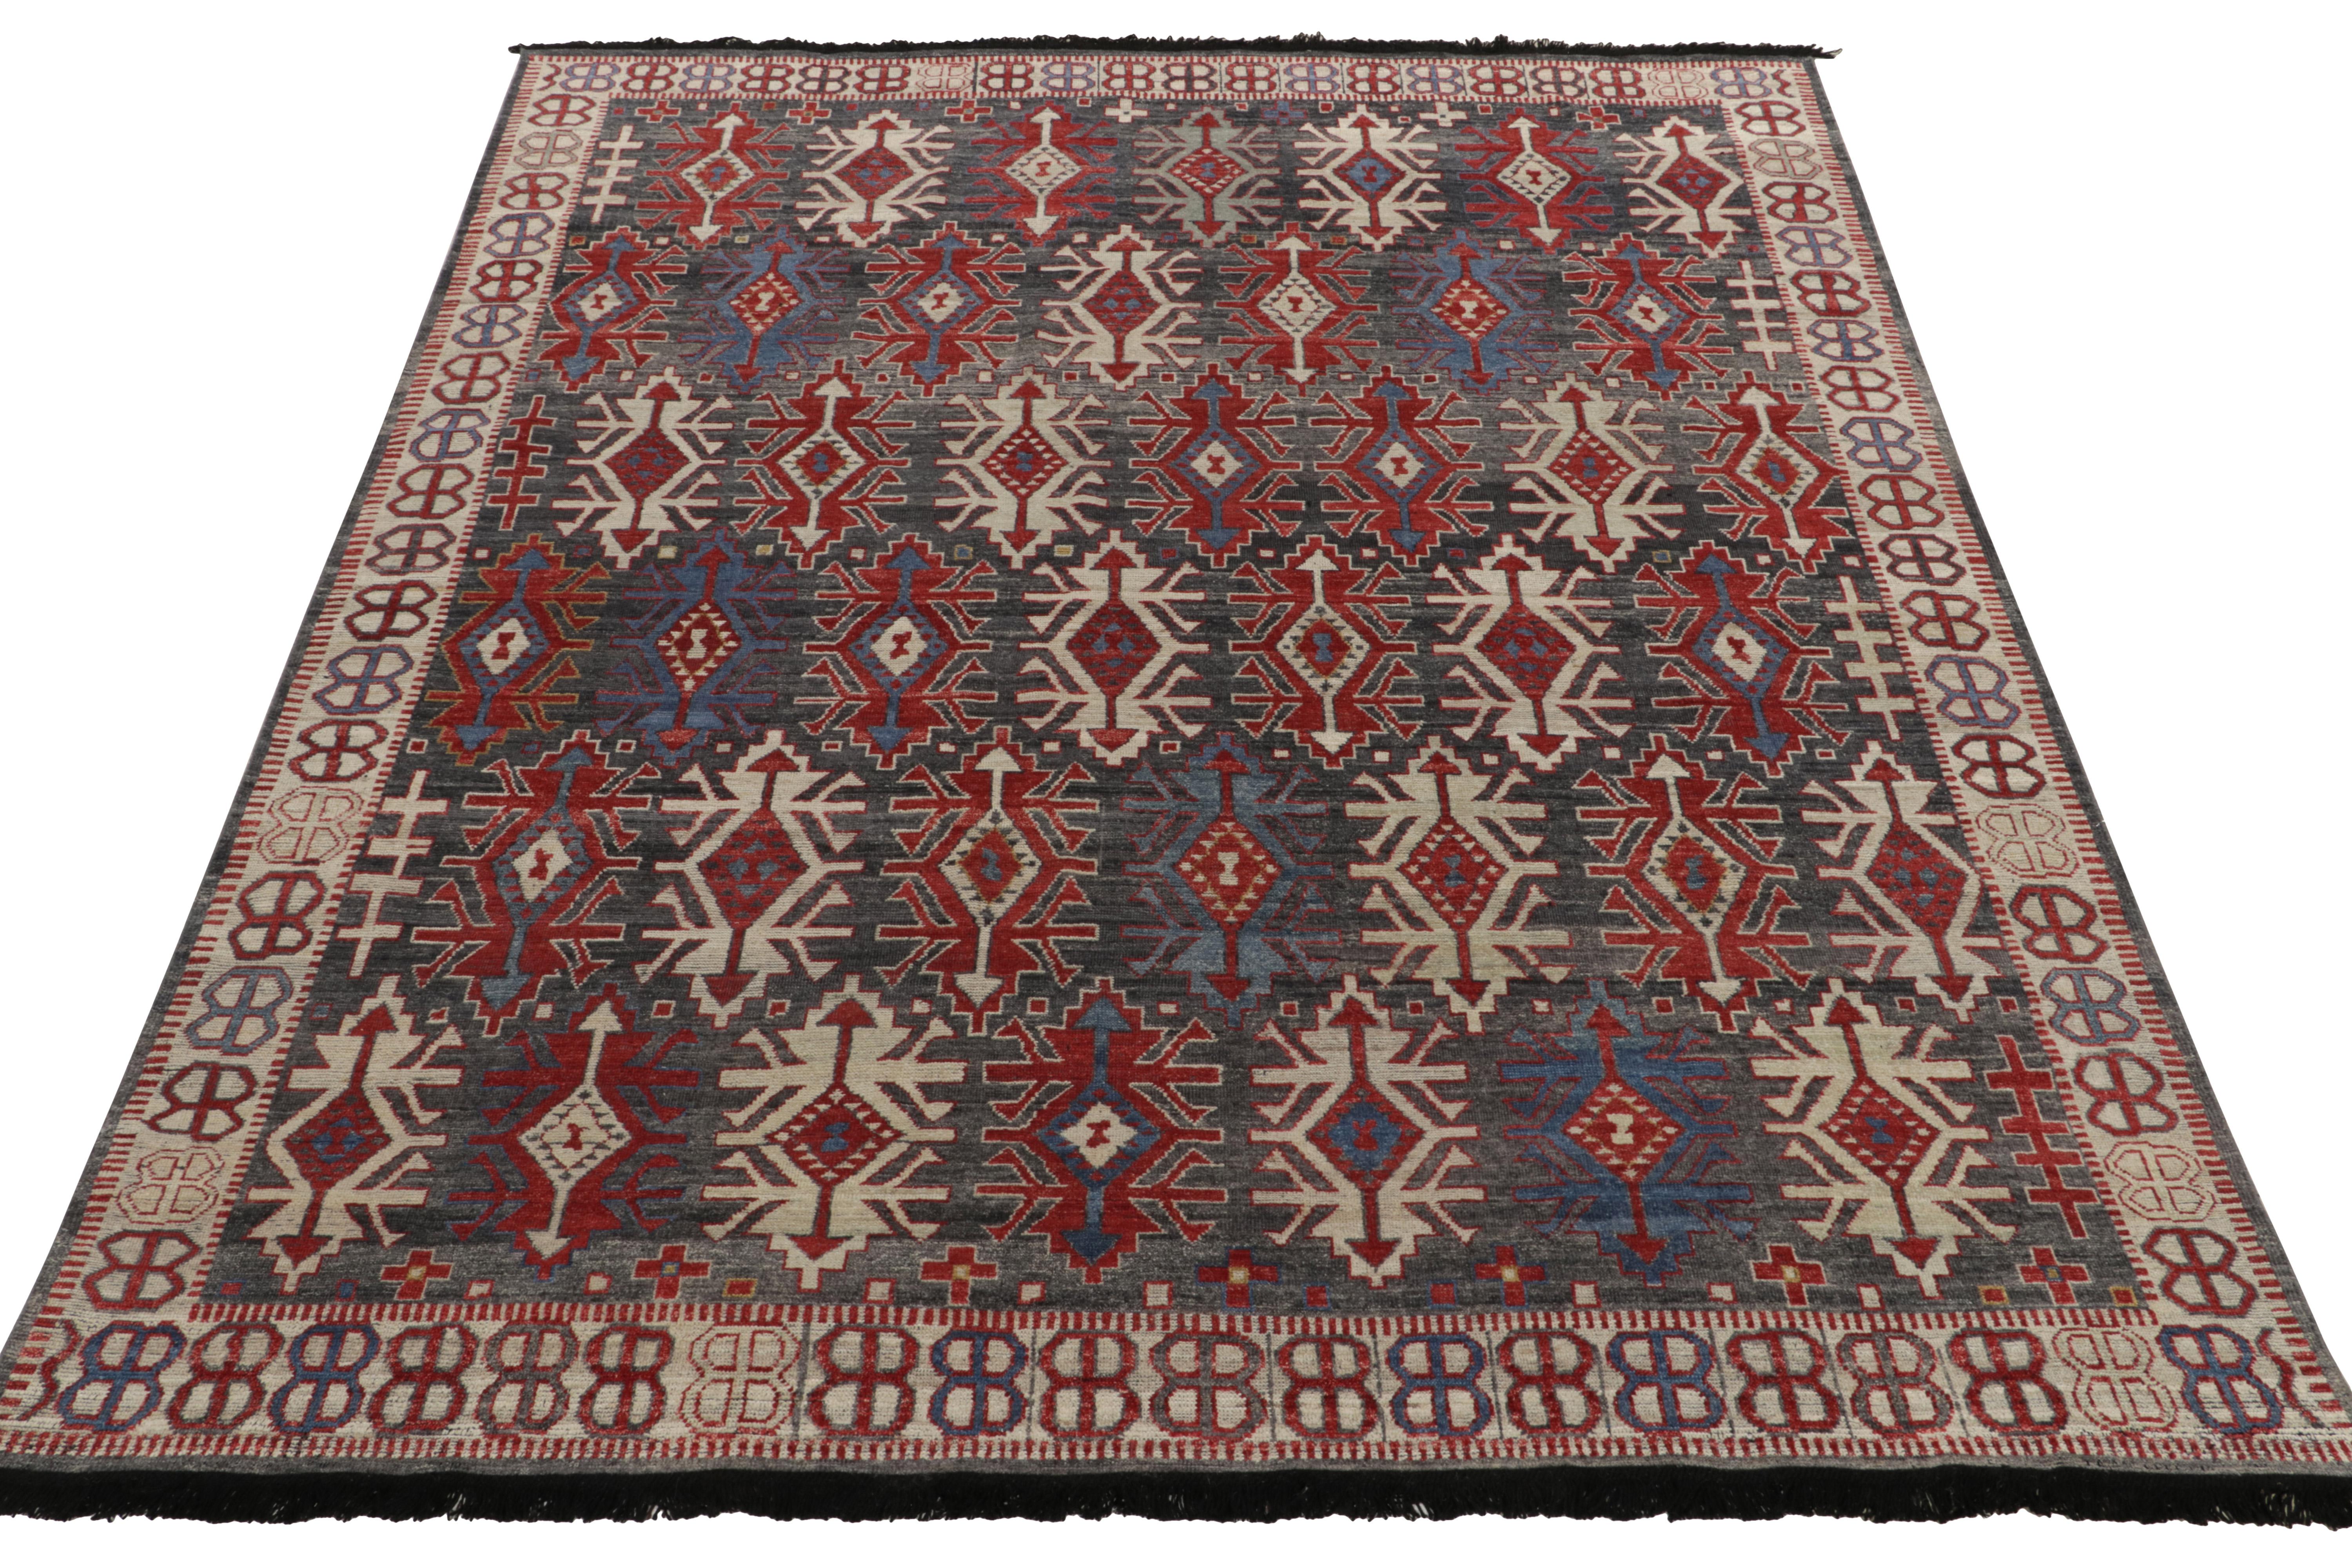 Hand-knotted in fine wool, this 6x8 rug from our Burano collection beautifully adapts the sensibility of antique caucasian kilims to tasteful pile. The splendid vision revels in tribal patterns playing joyfully in bright red, deep blue & steel gray